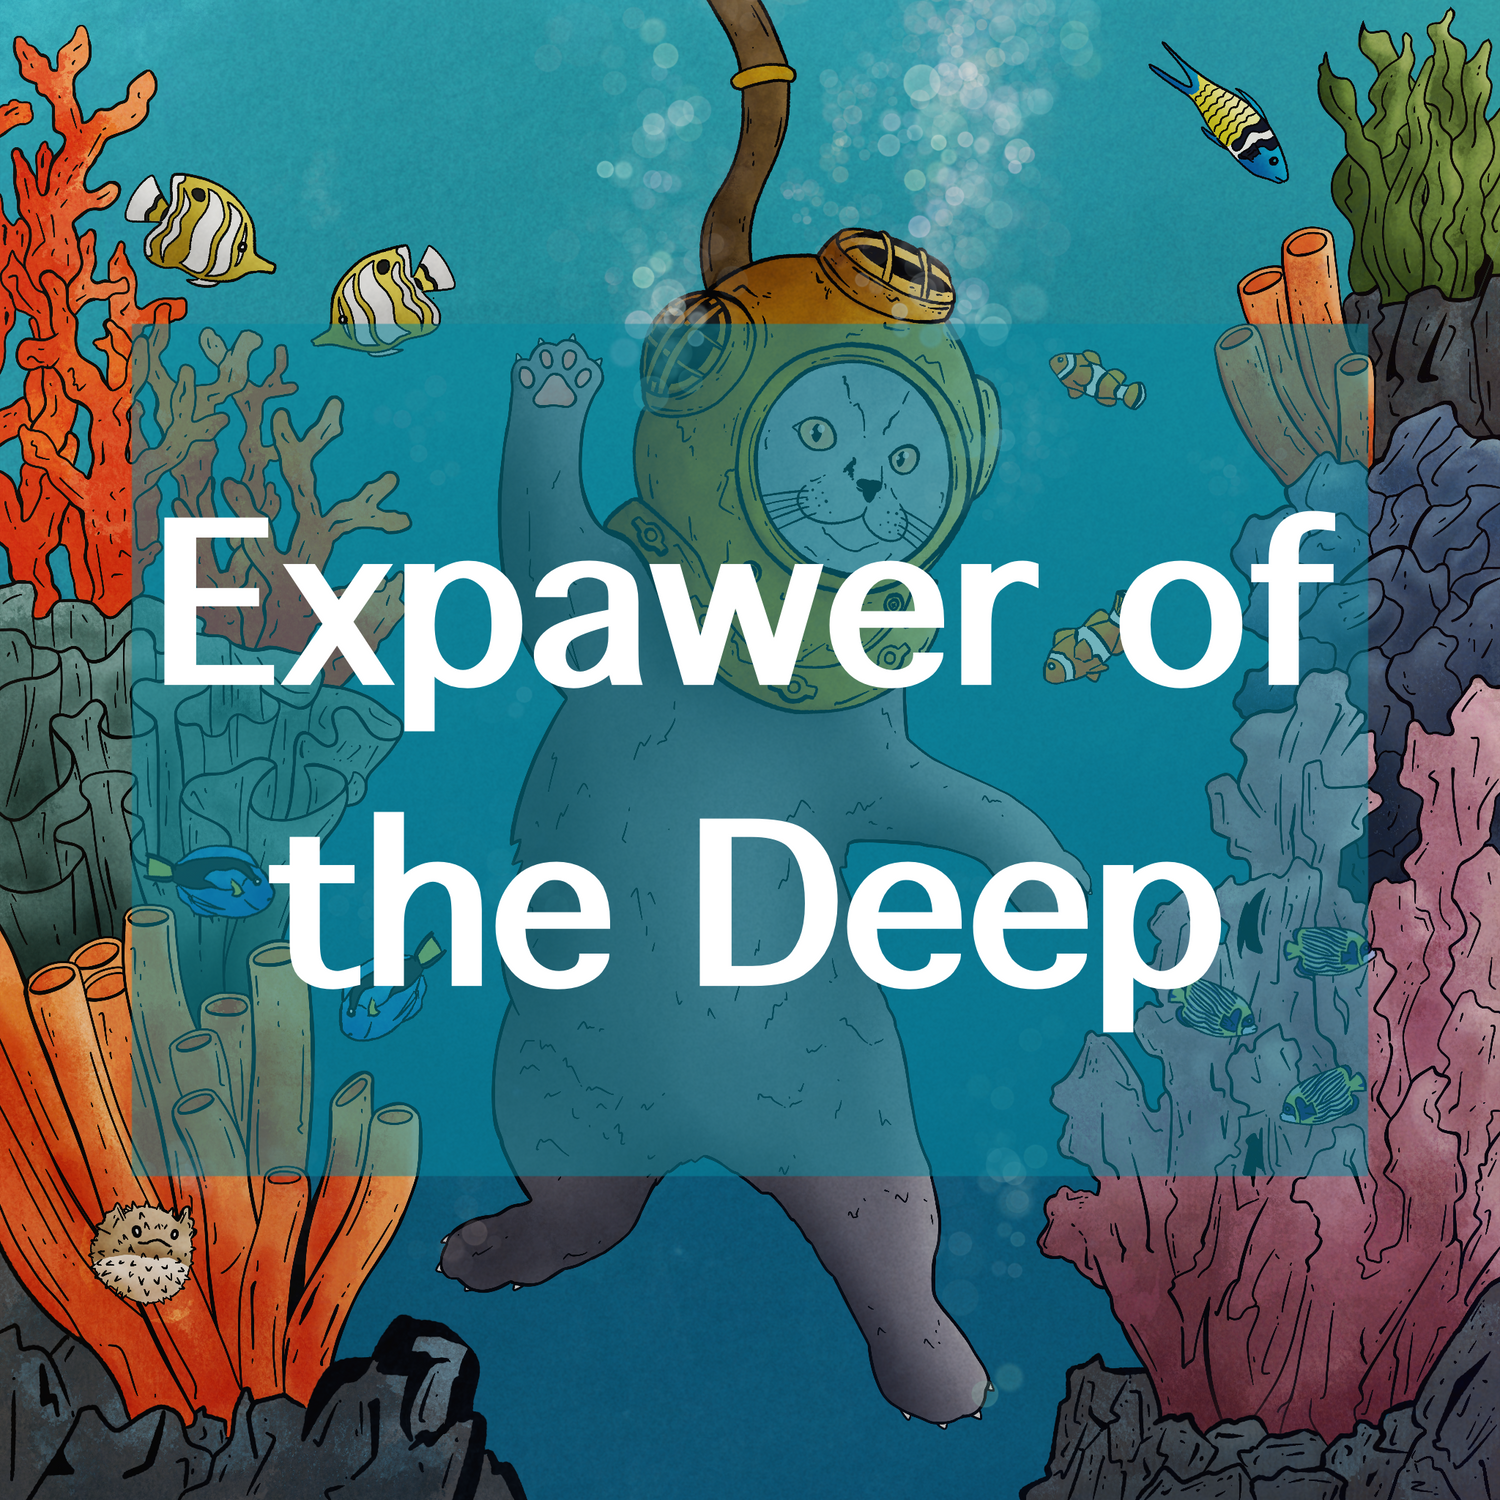 Expawer of the Deep